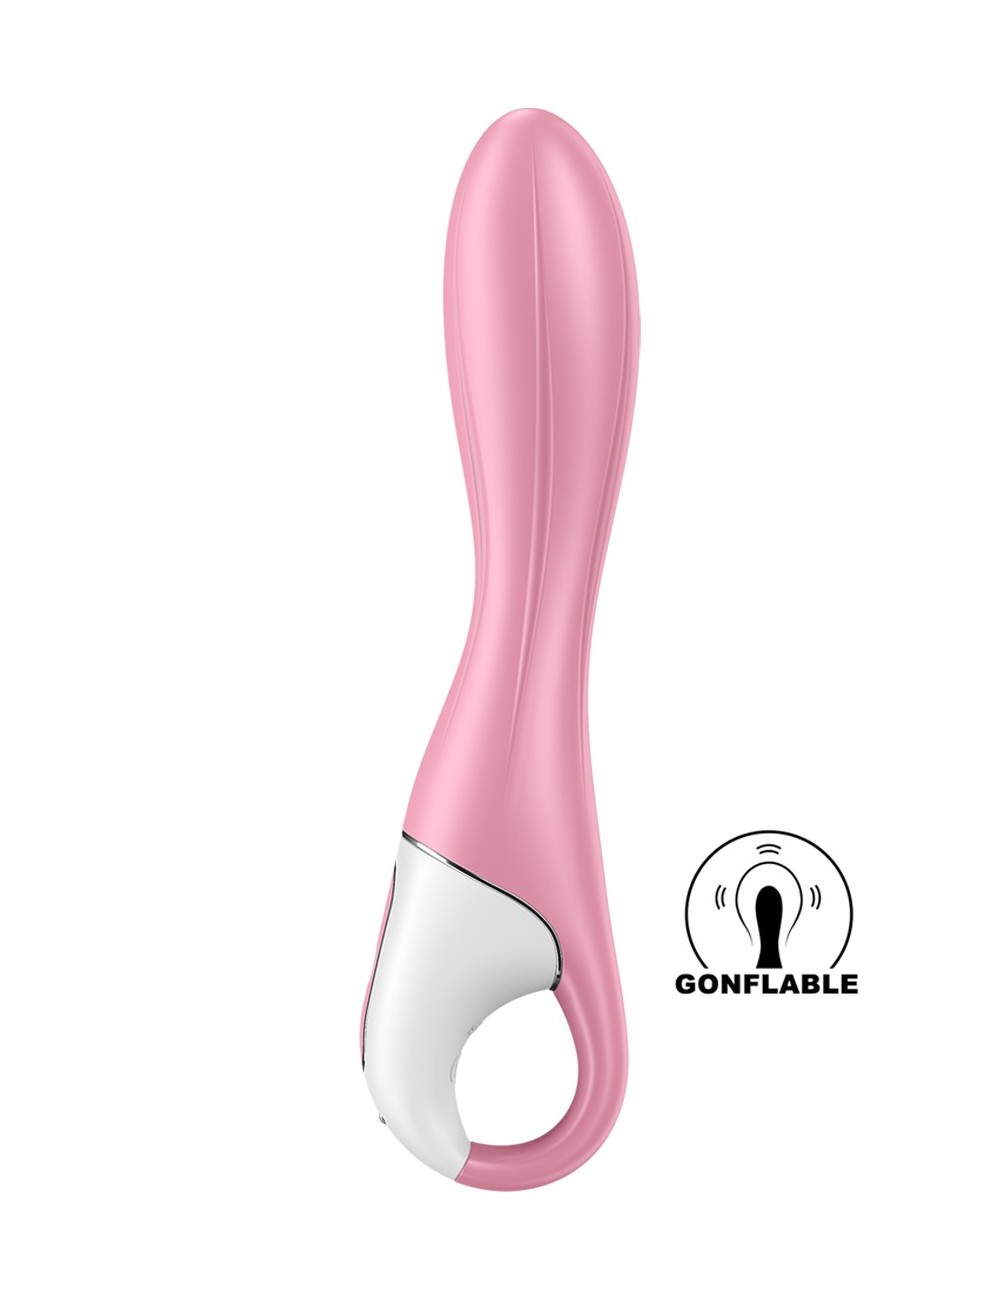 Vibro gonflable Satisfyer Air Pump Vibrator 2